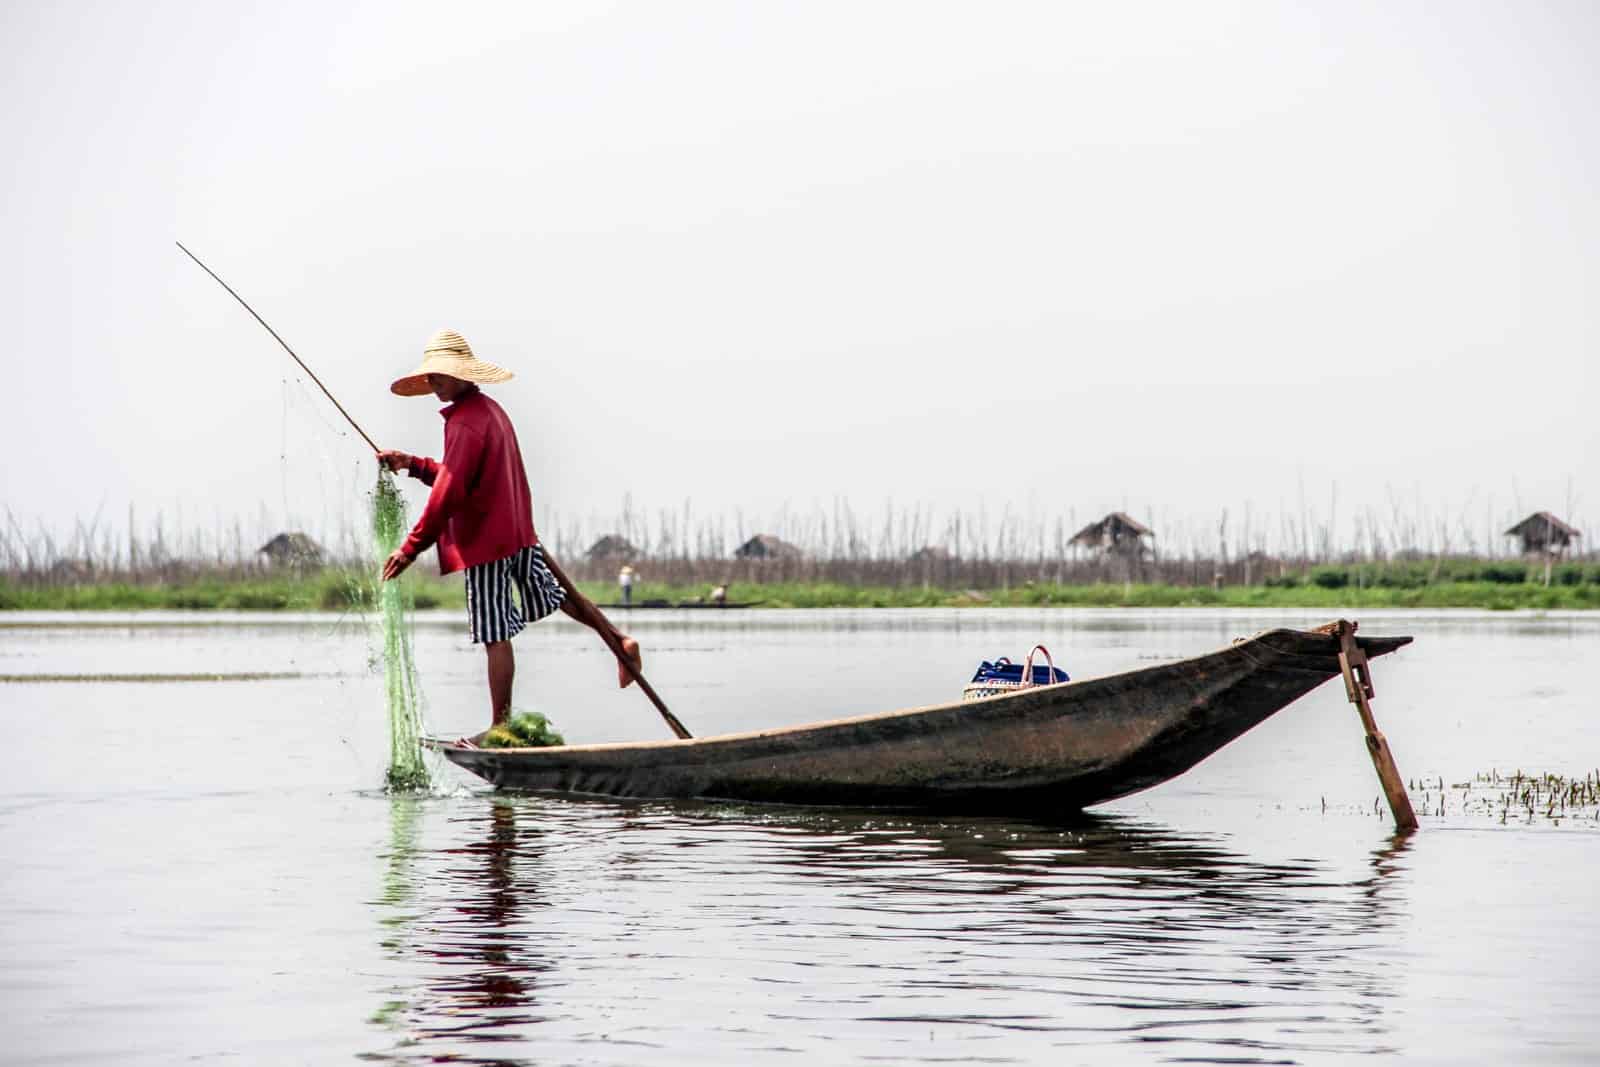 A fisherman in a red top, stripy shorts and a straw hat on Inle Lake in Myanmar practicing the traditional method of rowing the oar with one leg